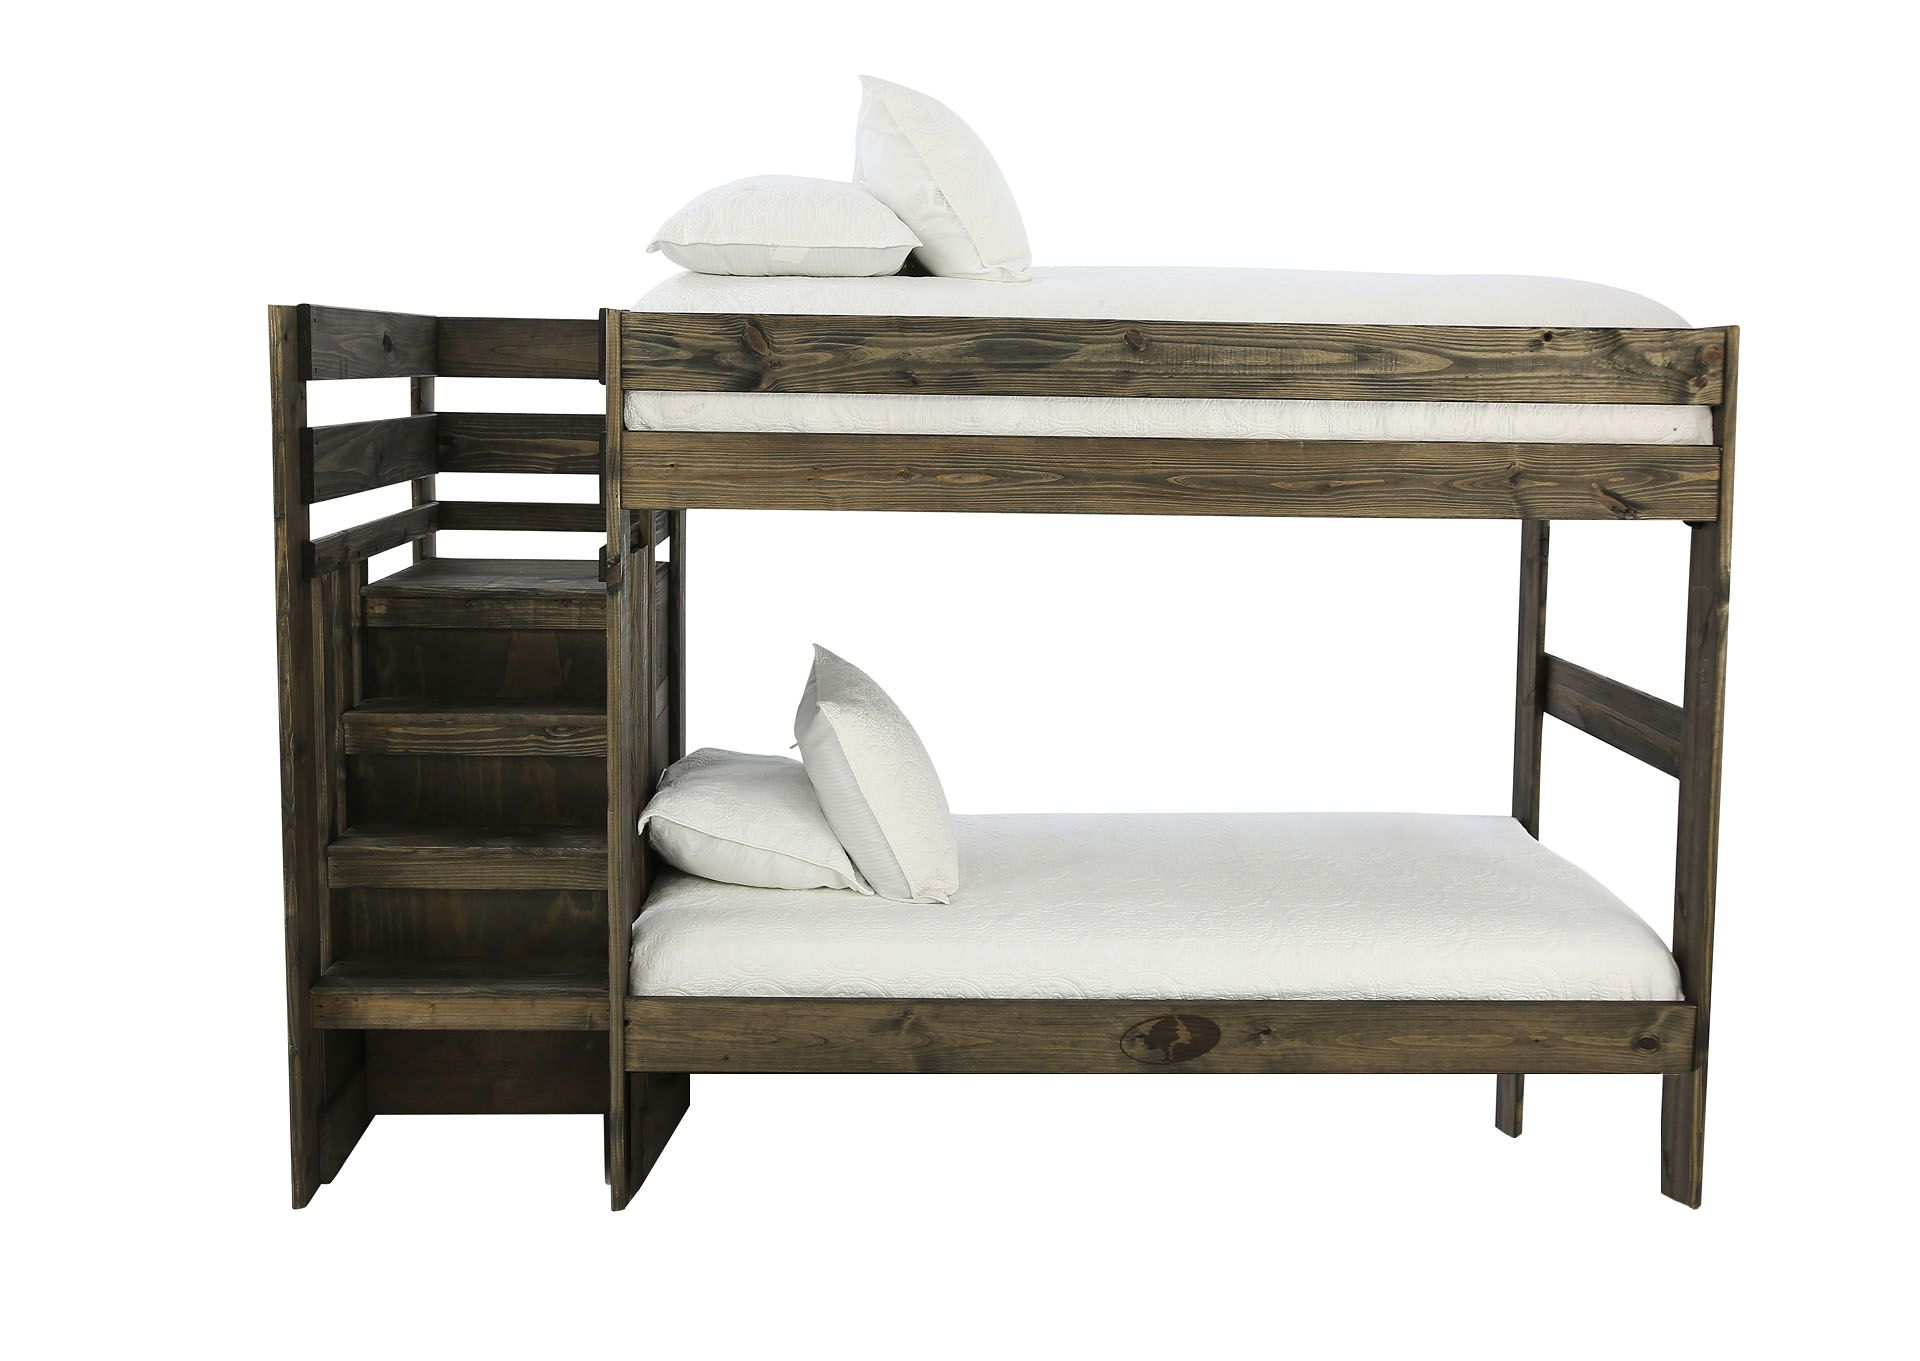 Silas Mossy Oak Twin Stair Bunkbed, Oak Bunk Beds With Storage